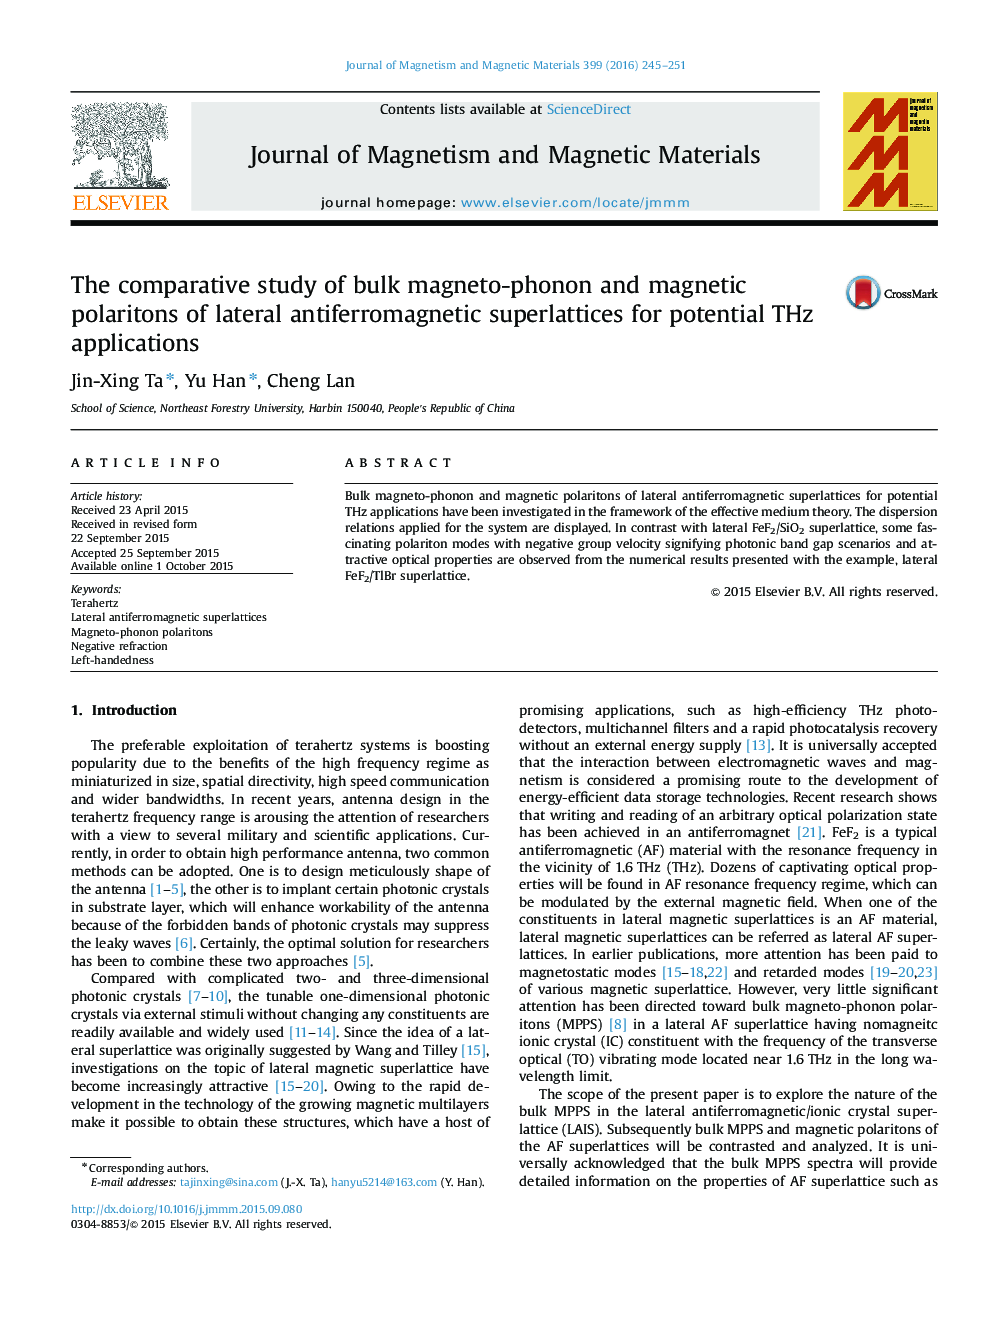 The comparative study of bulk magneto-phonon and magnetic polaritons of lateral antiferromagnetic superlattices for potential THz applications